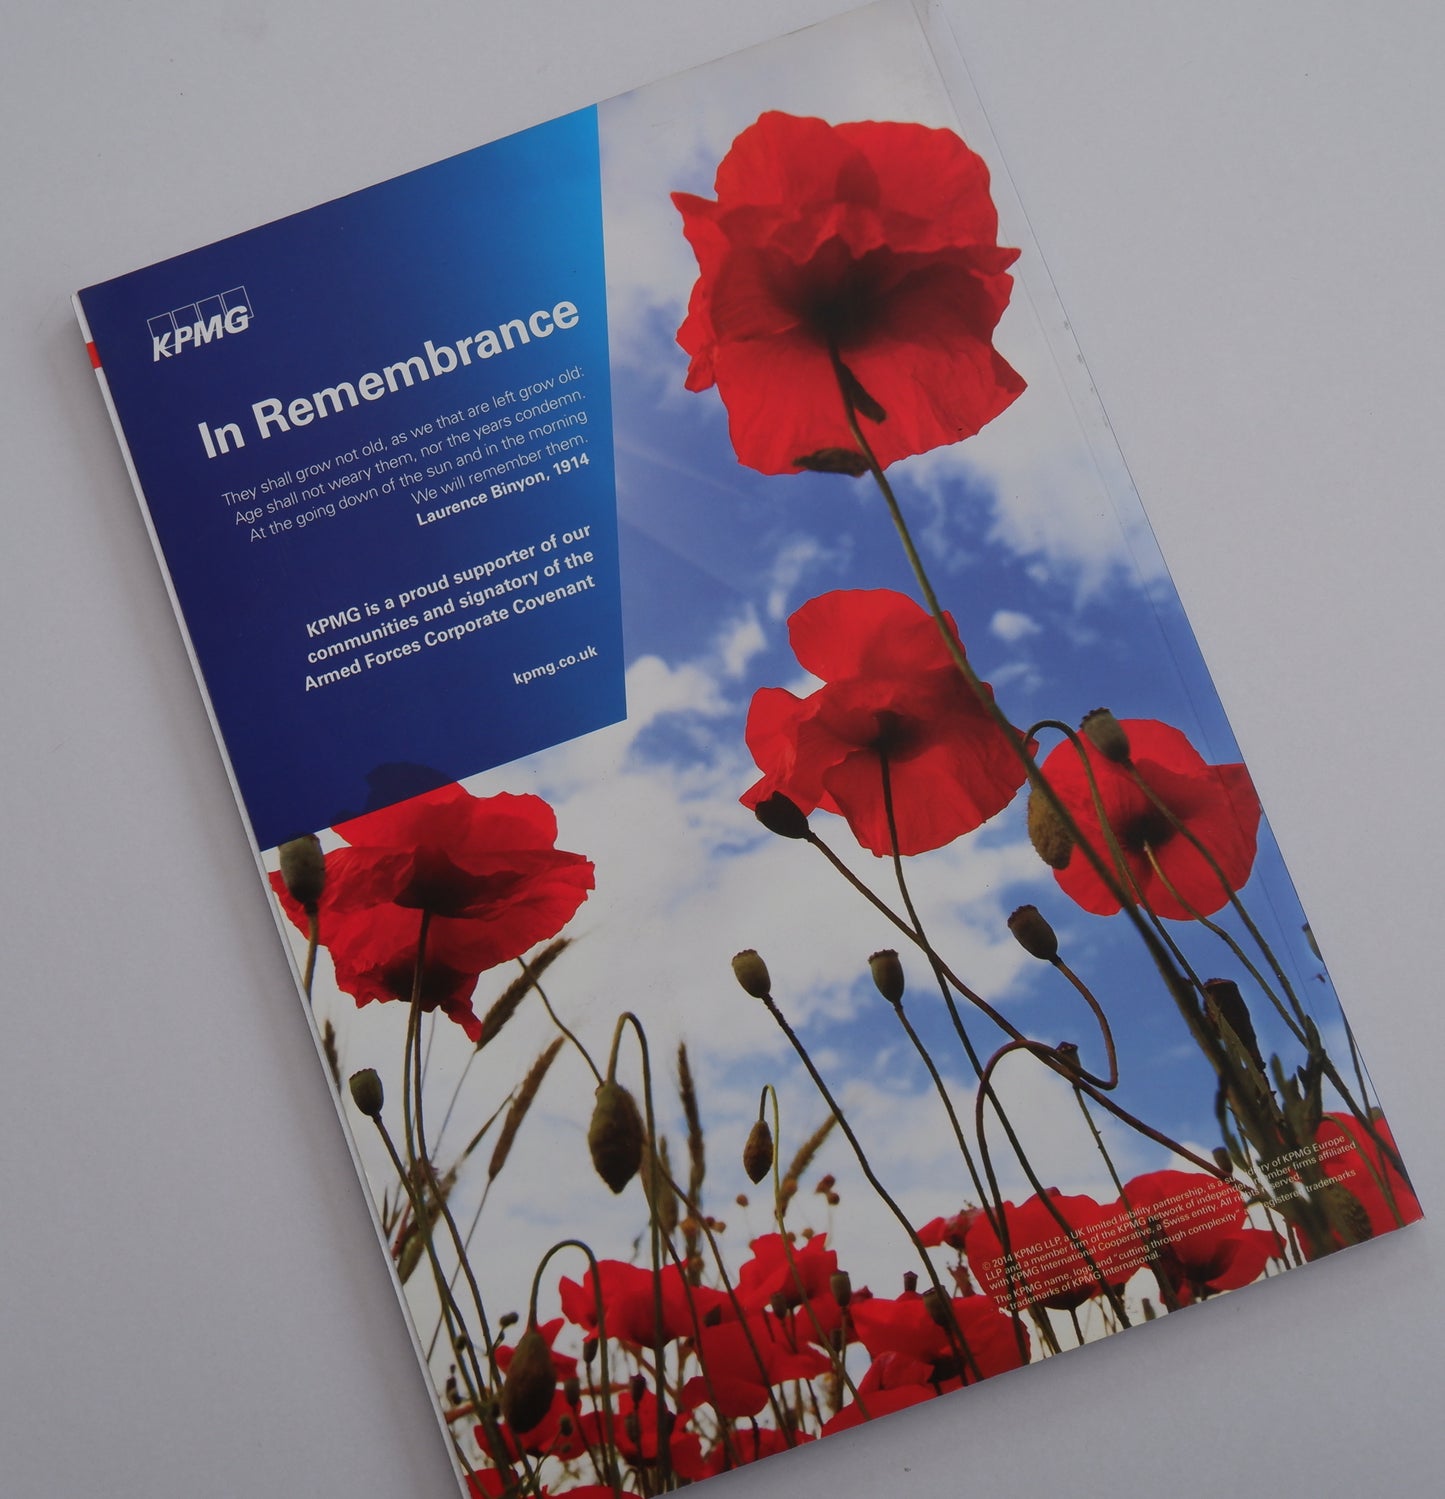 THE GREAT WAR 1914-1918 SSAFA'S OFFICIAL GUIDE TO WORLD WAR 1